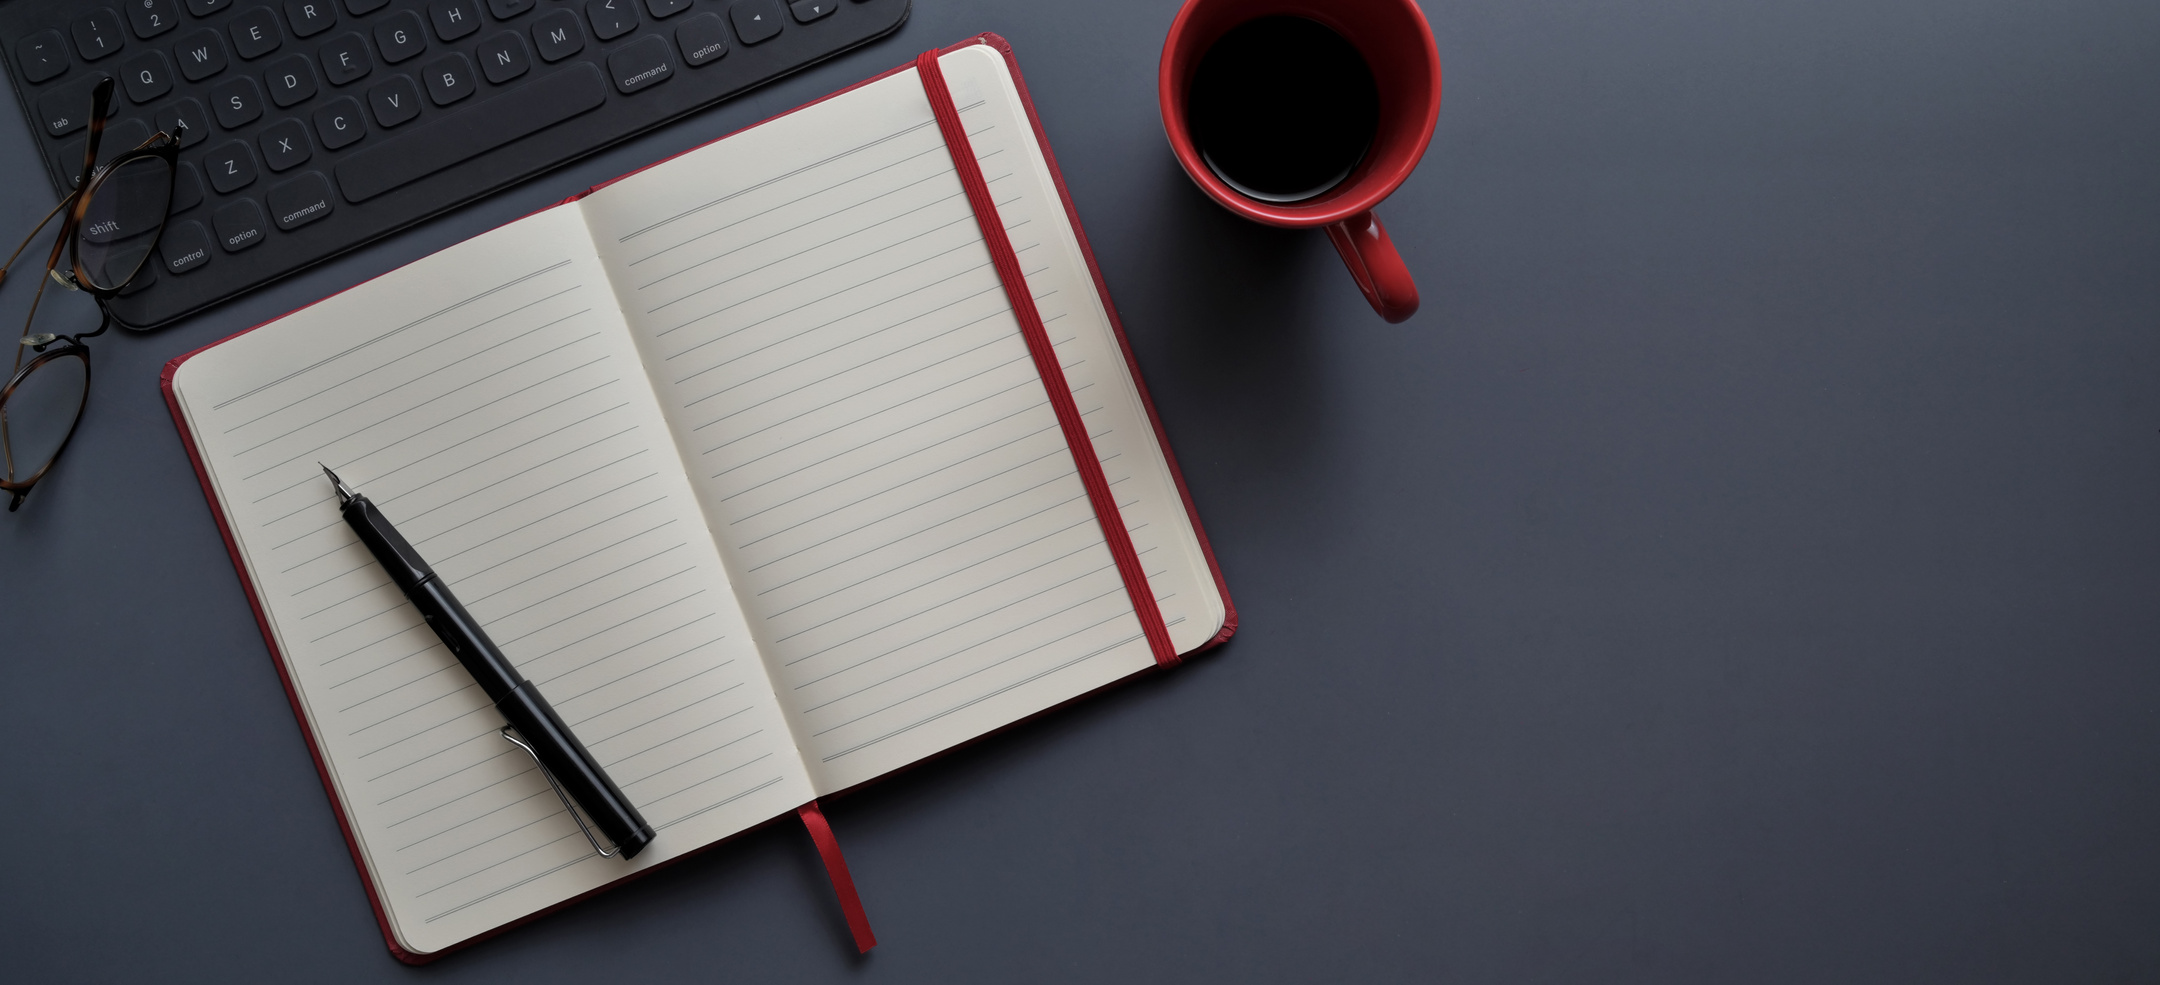 Notebook and Pen Beside Red Mug on Gray Surface